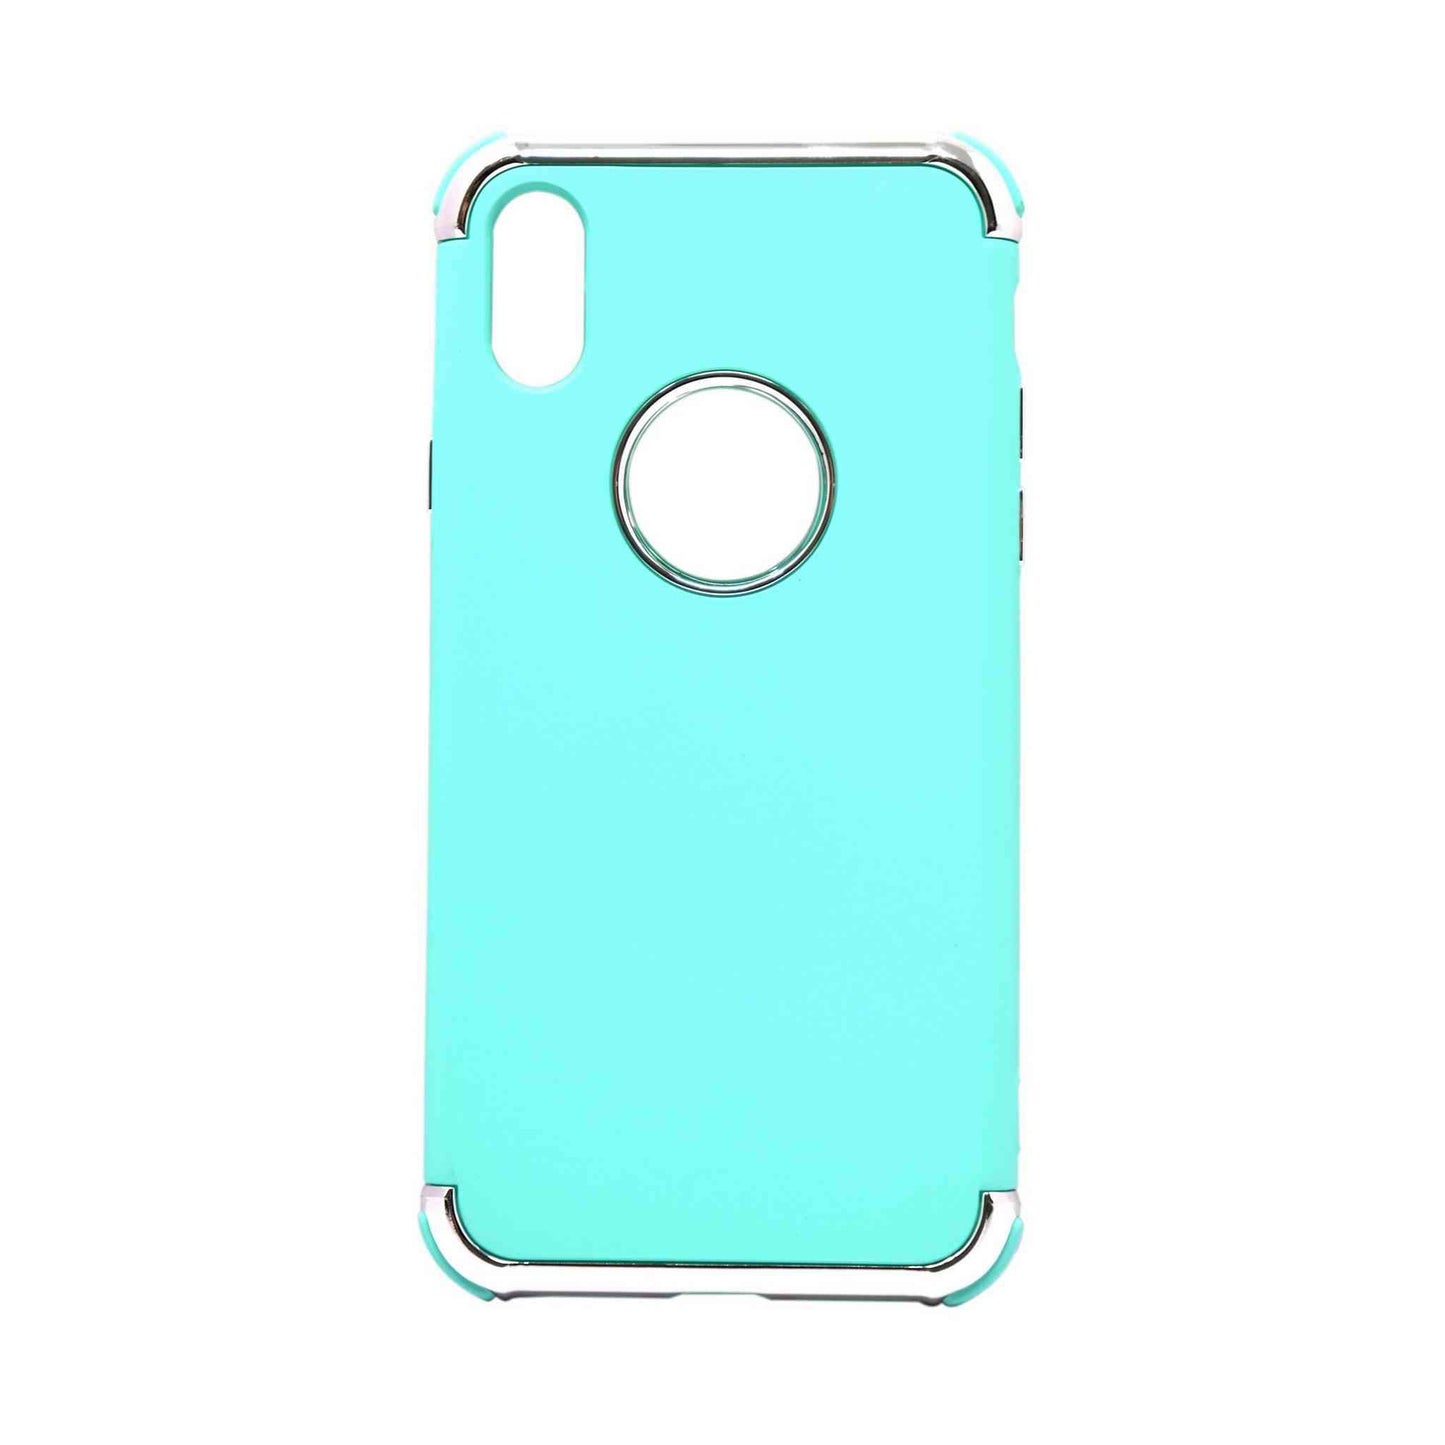 Indian Petals Polycarbonate Electro-plated Shock-proof Anti-scratch Protective Mobile Back Case Cover for Apple iPhone X, Turquoise - Indian Petals